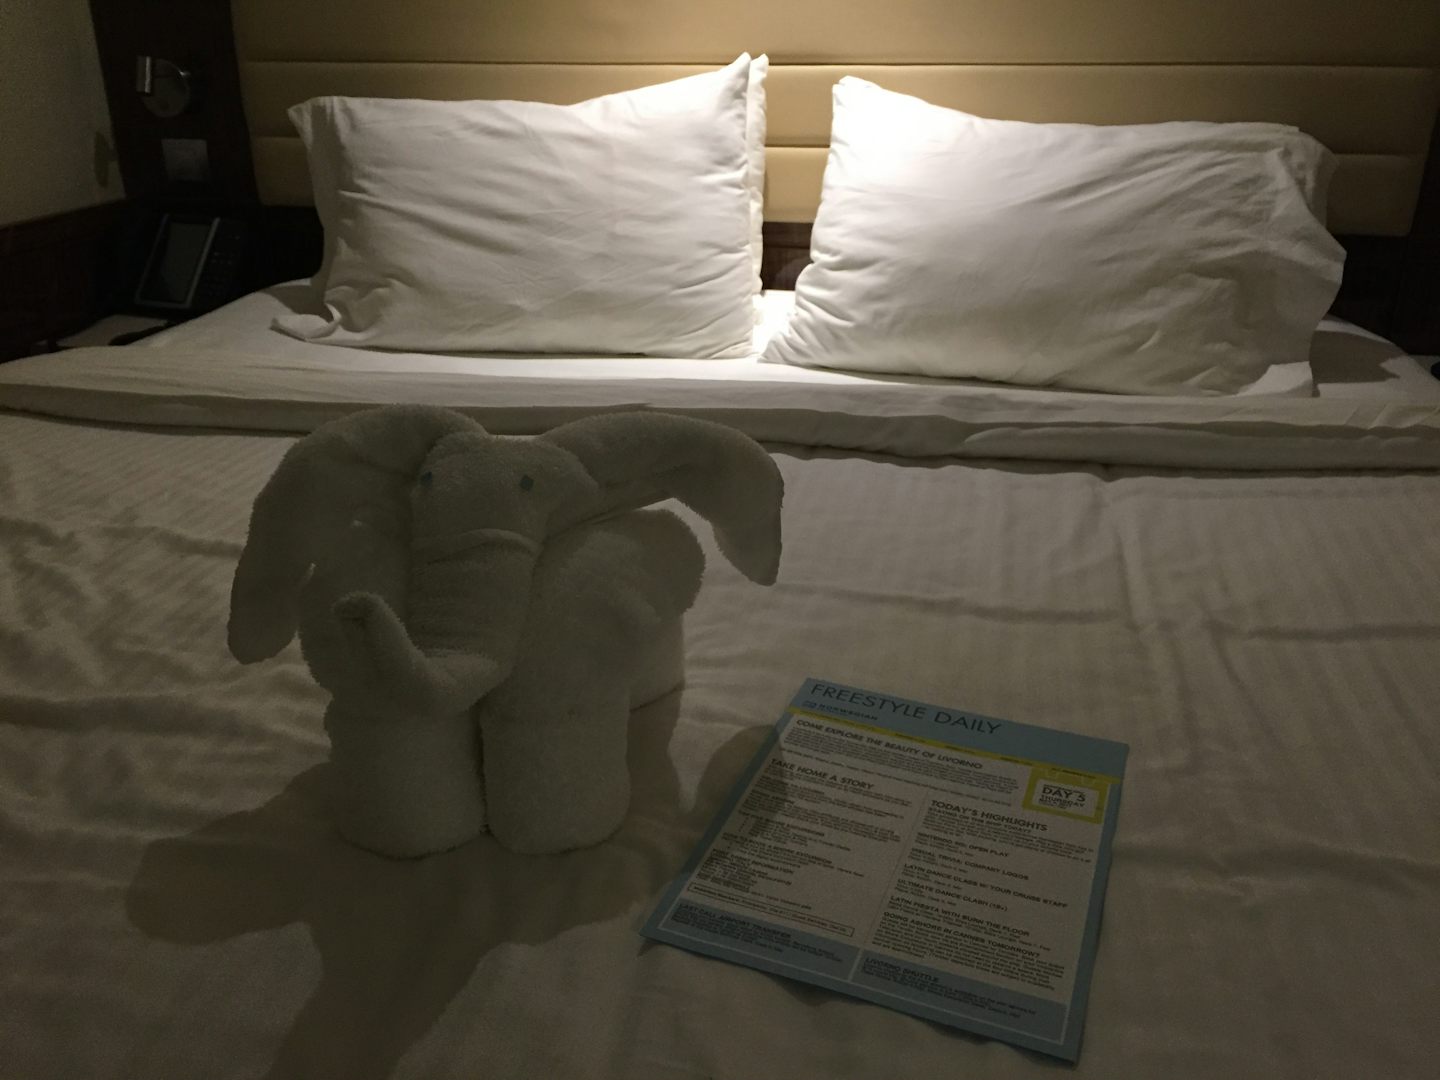 cute towel animals (leave a tip for these people!)